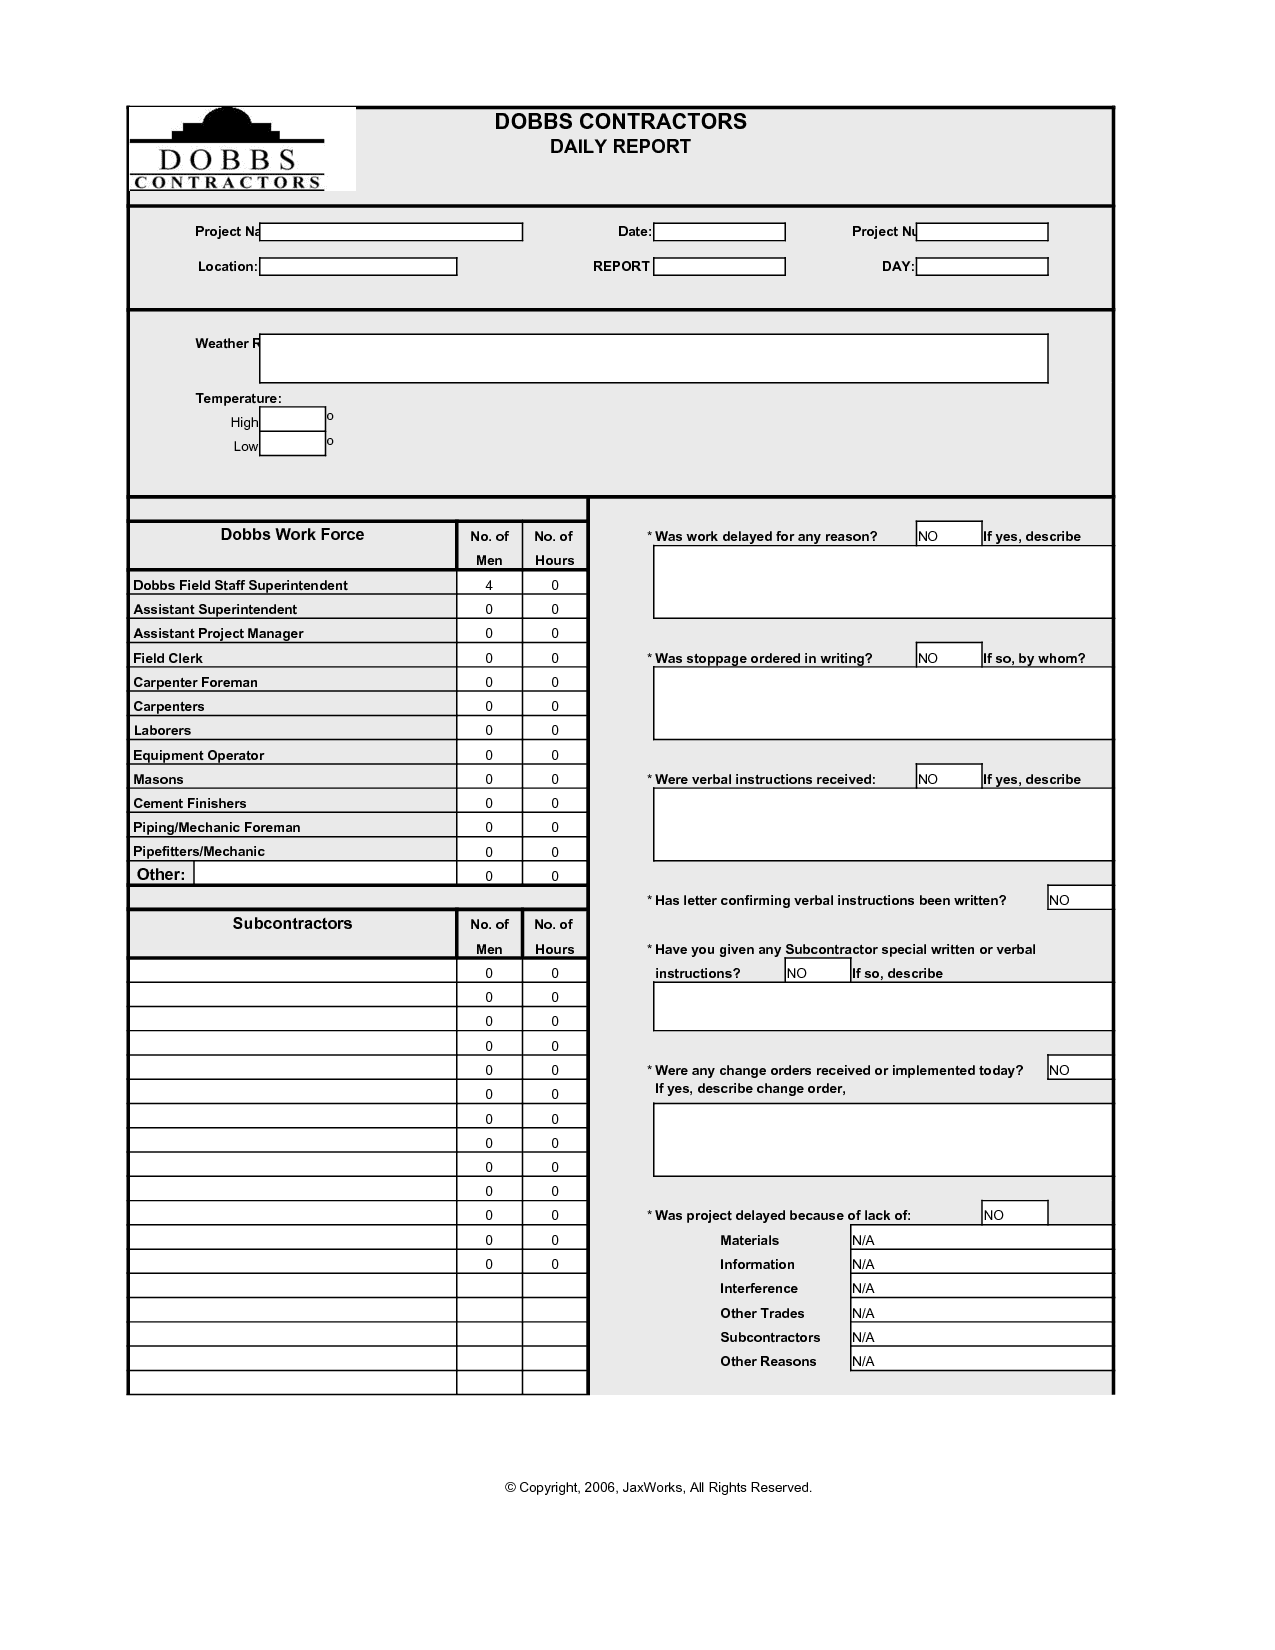 SOC Report Example And SOC 1 Report Review Checklist